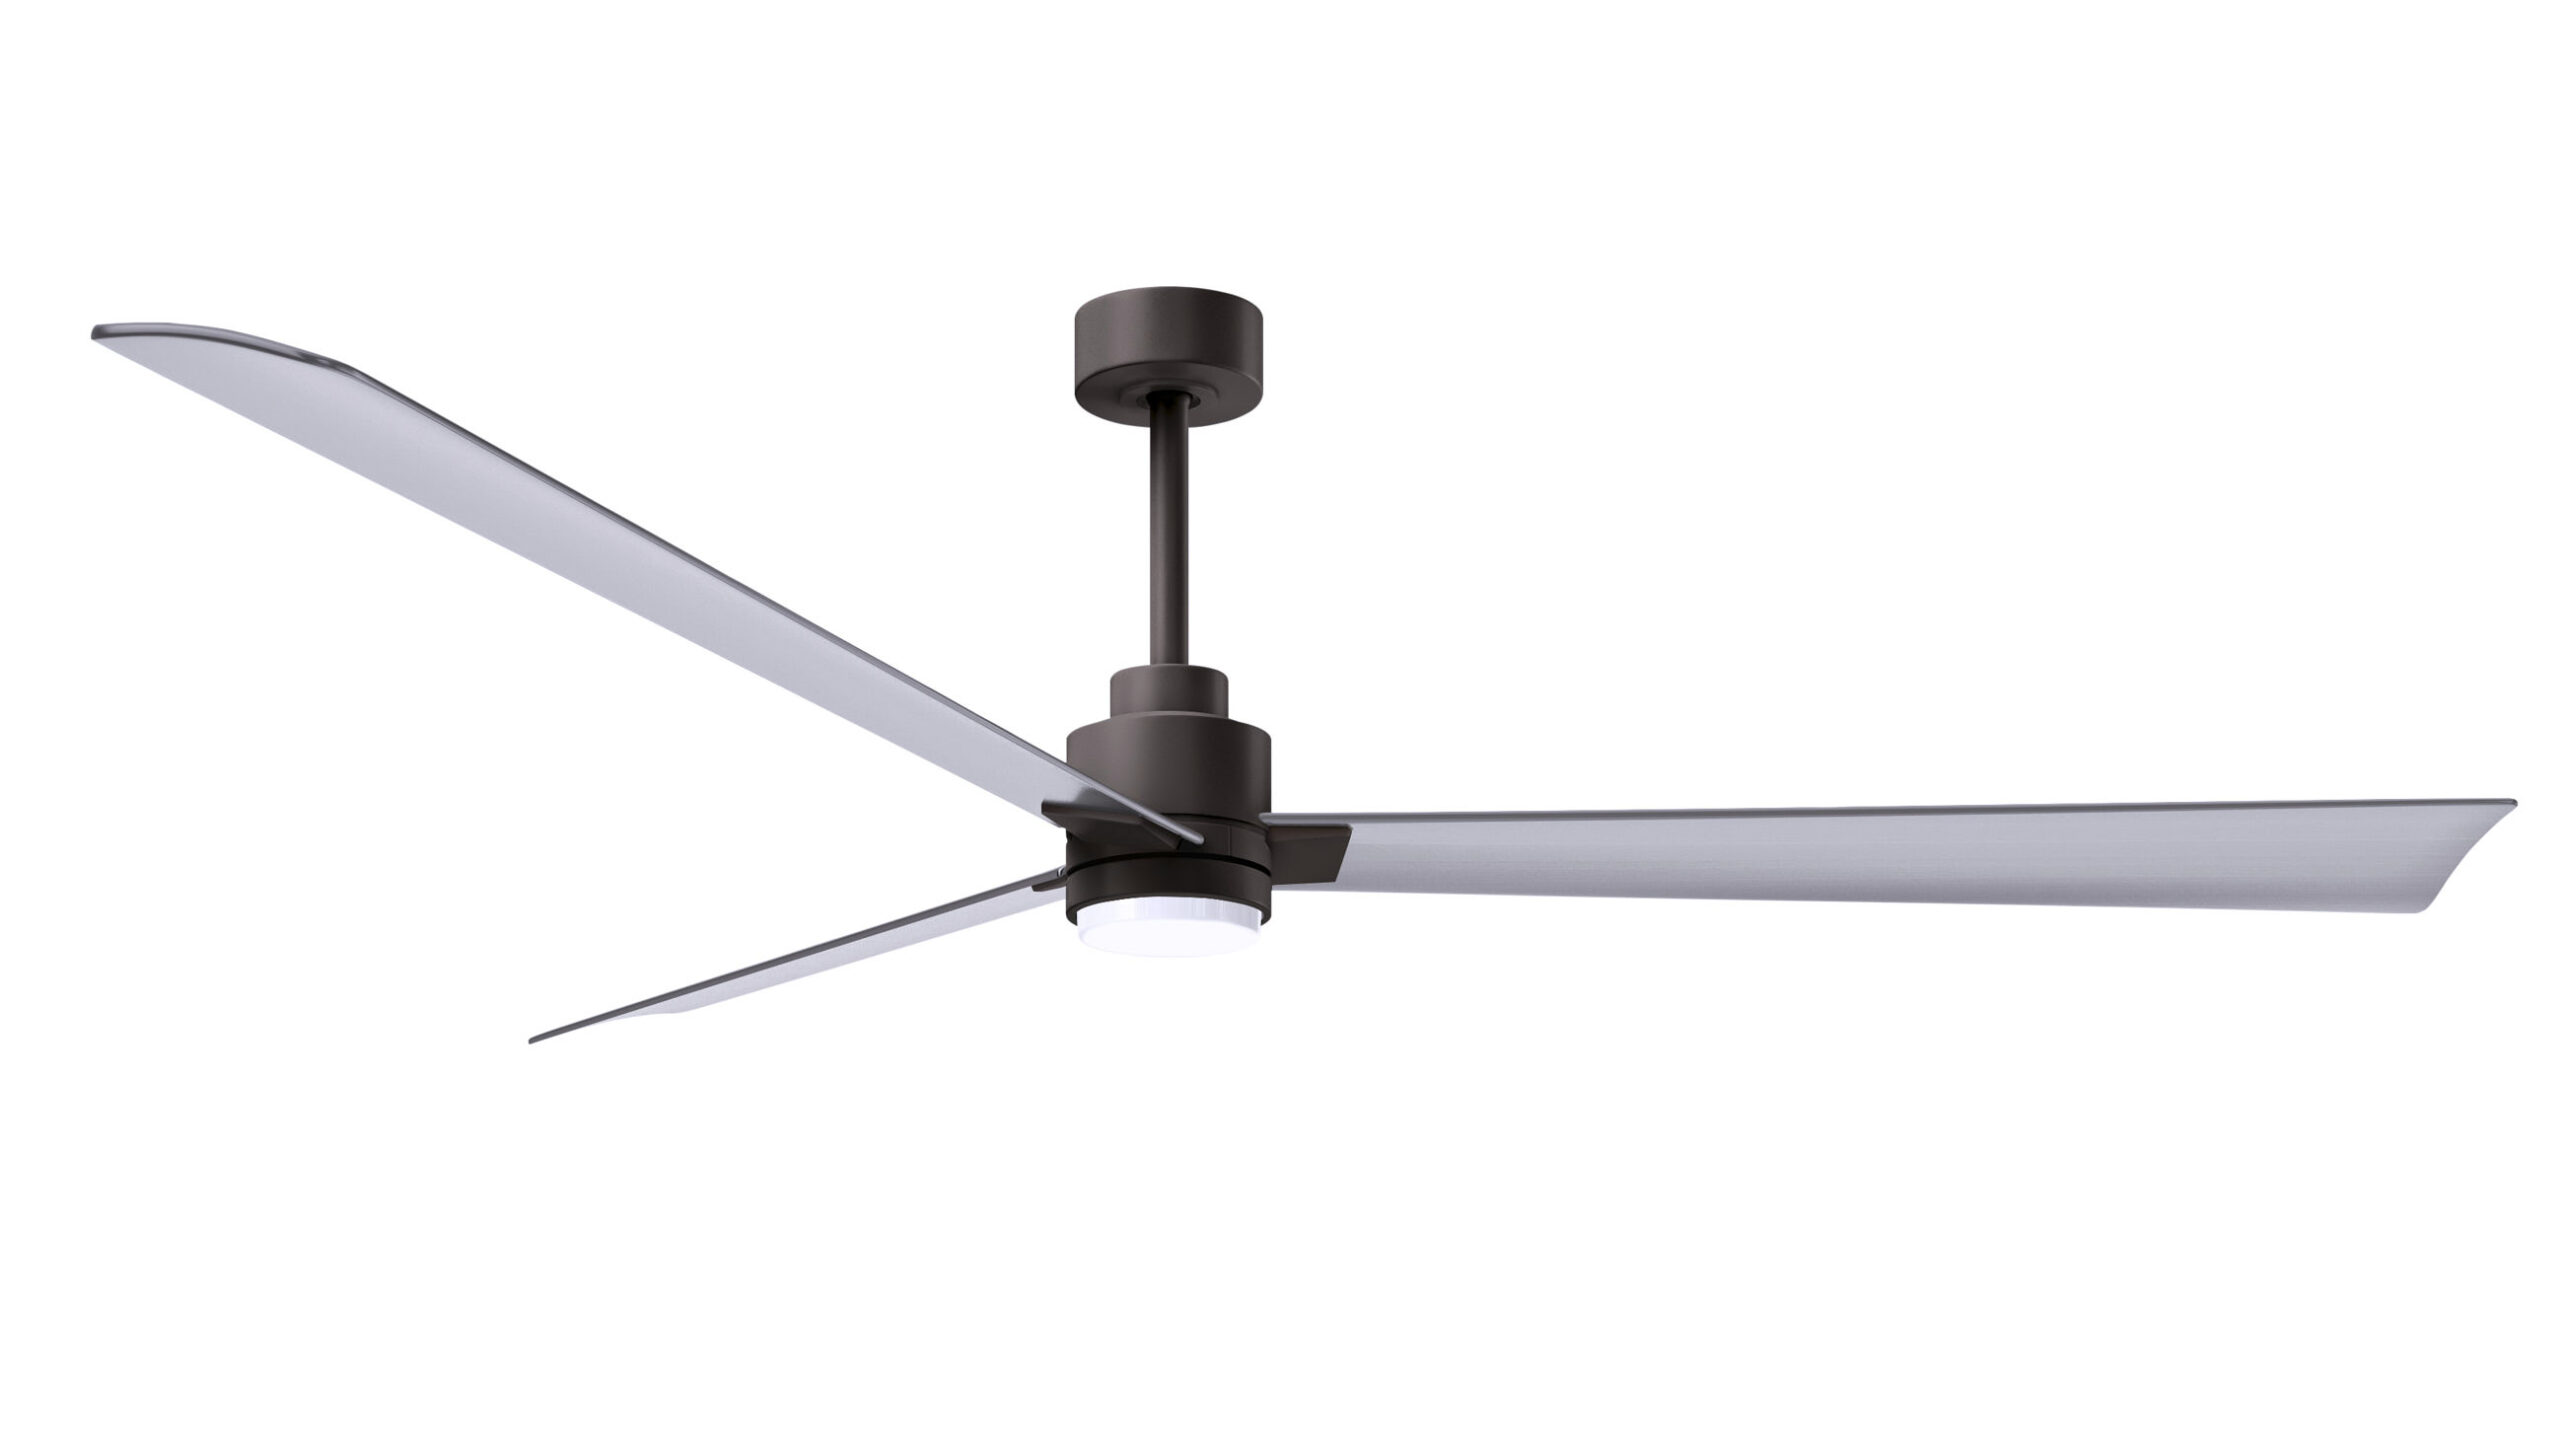 Alessandra-LK ceiling fan in textured bronze finish with 72